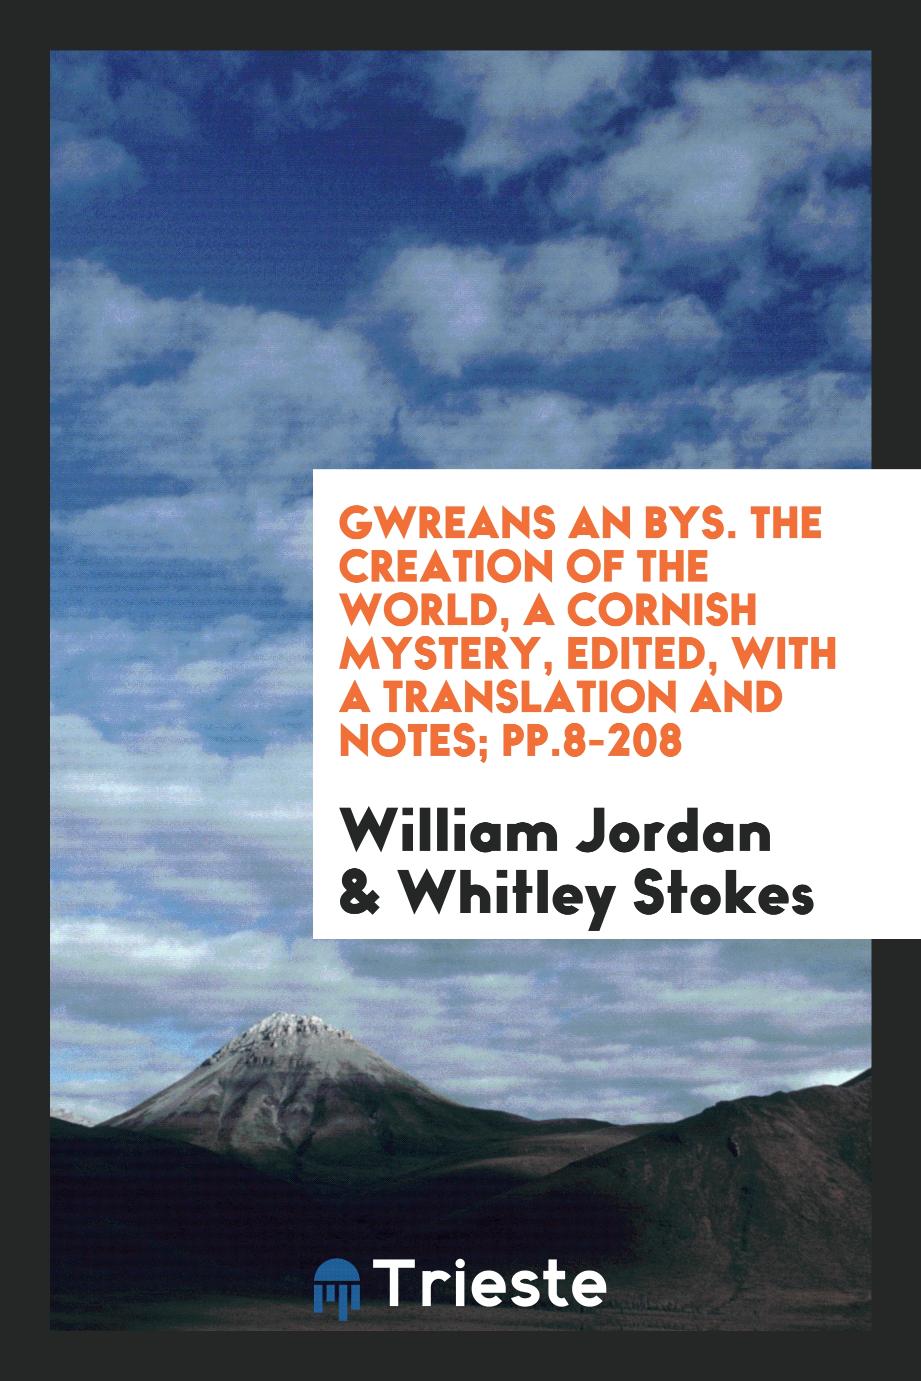 Gwreans an Bys. The Creation of the World, a Cornish Mystery, Edited, with a Translation and Notes; pp.8-208